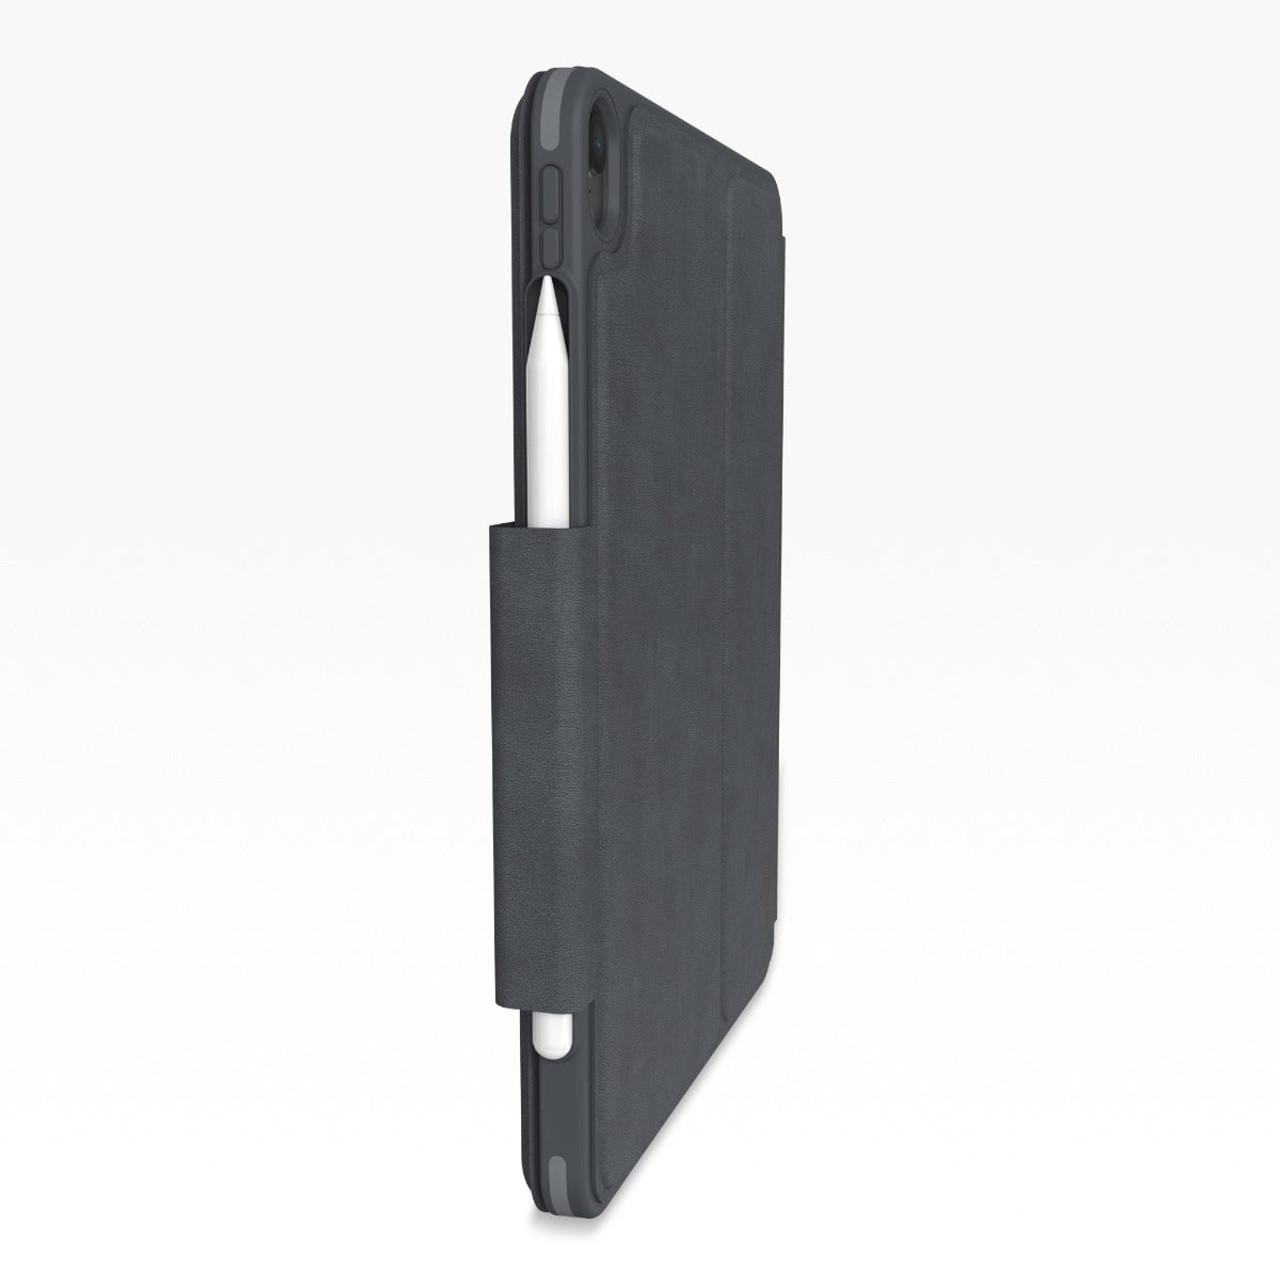 Smart cover case for iPad with a stylus holder - Black